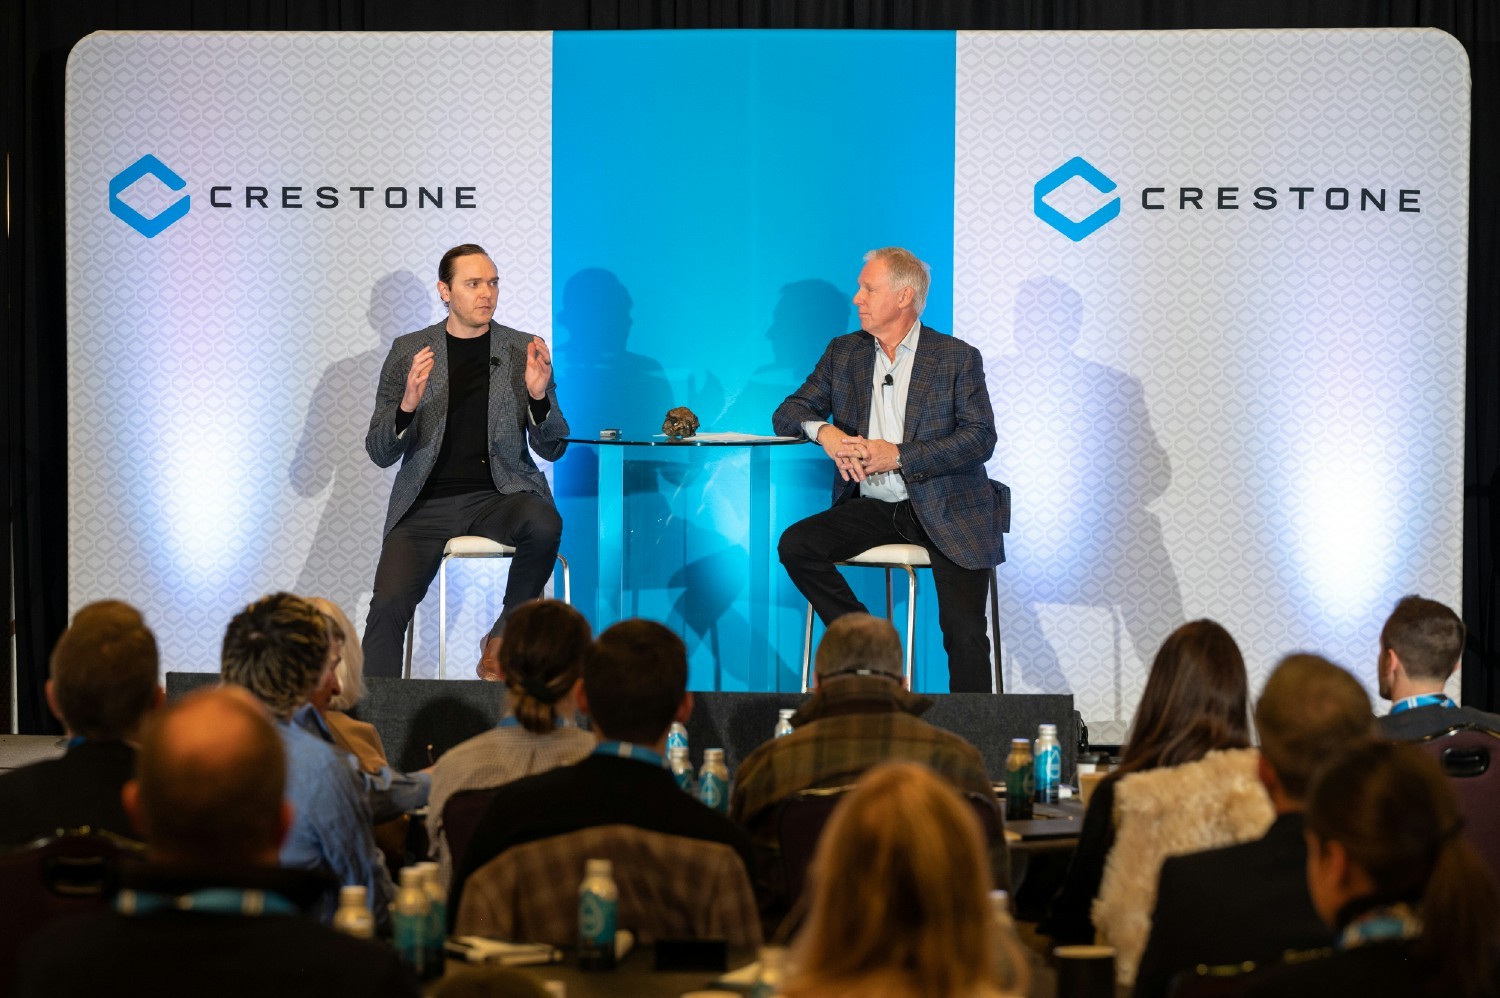 Crestone's Michael McGowan and Eric Kramer at our Investment Conference.